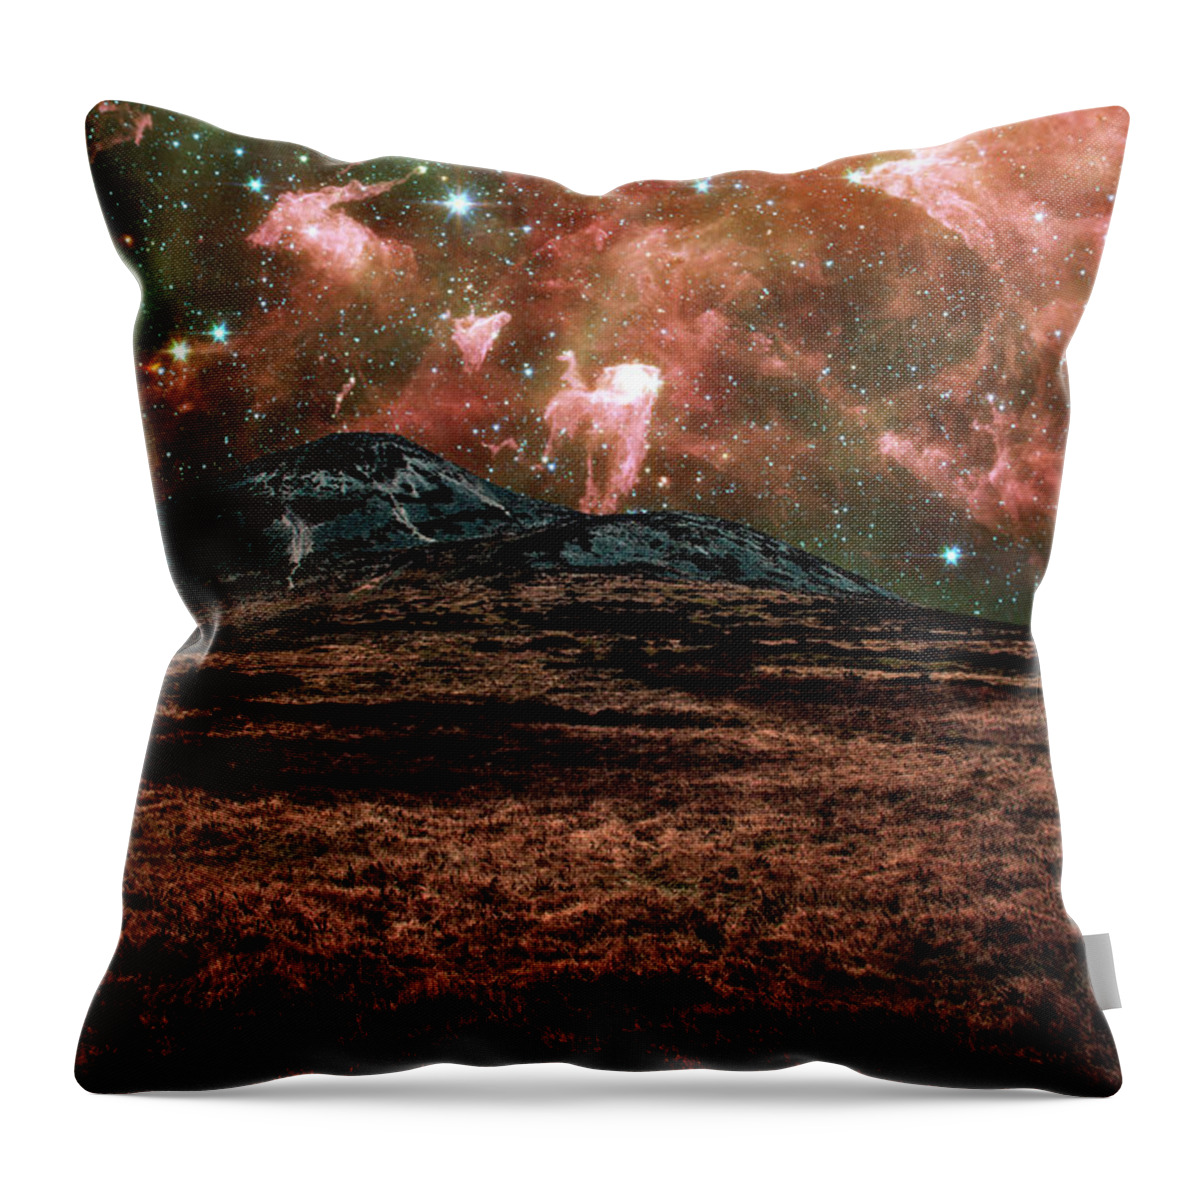 Carina Nebula Throw Pillow featuring the photograph Red Planet by Semmick Photo